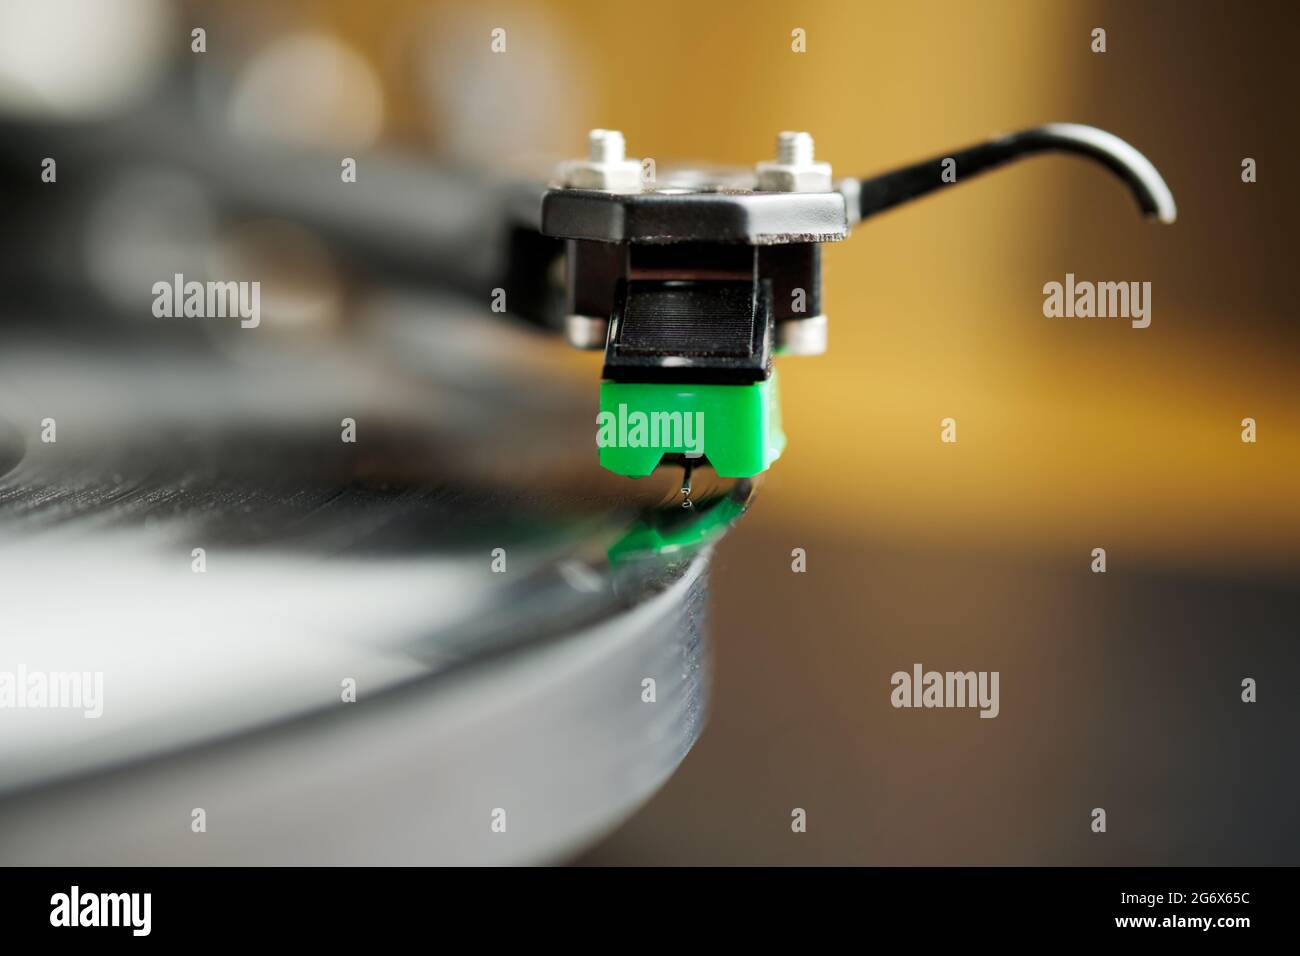 A turntable stylus sitting on the lead in groove of a record or album sitting on a turntable platter. Stock Photo